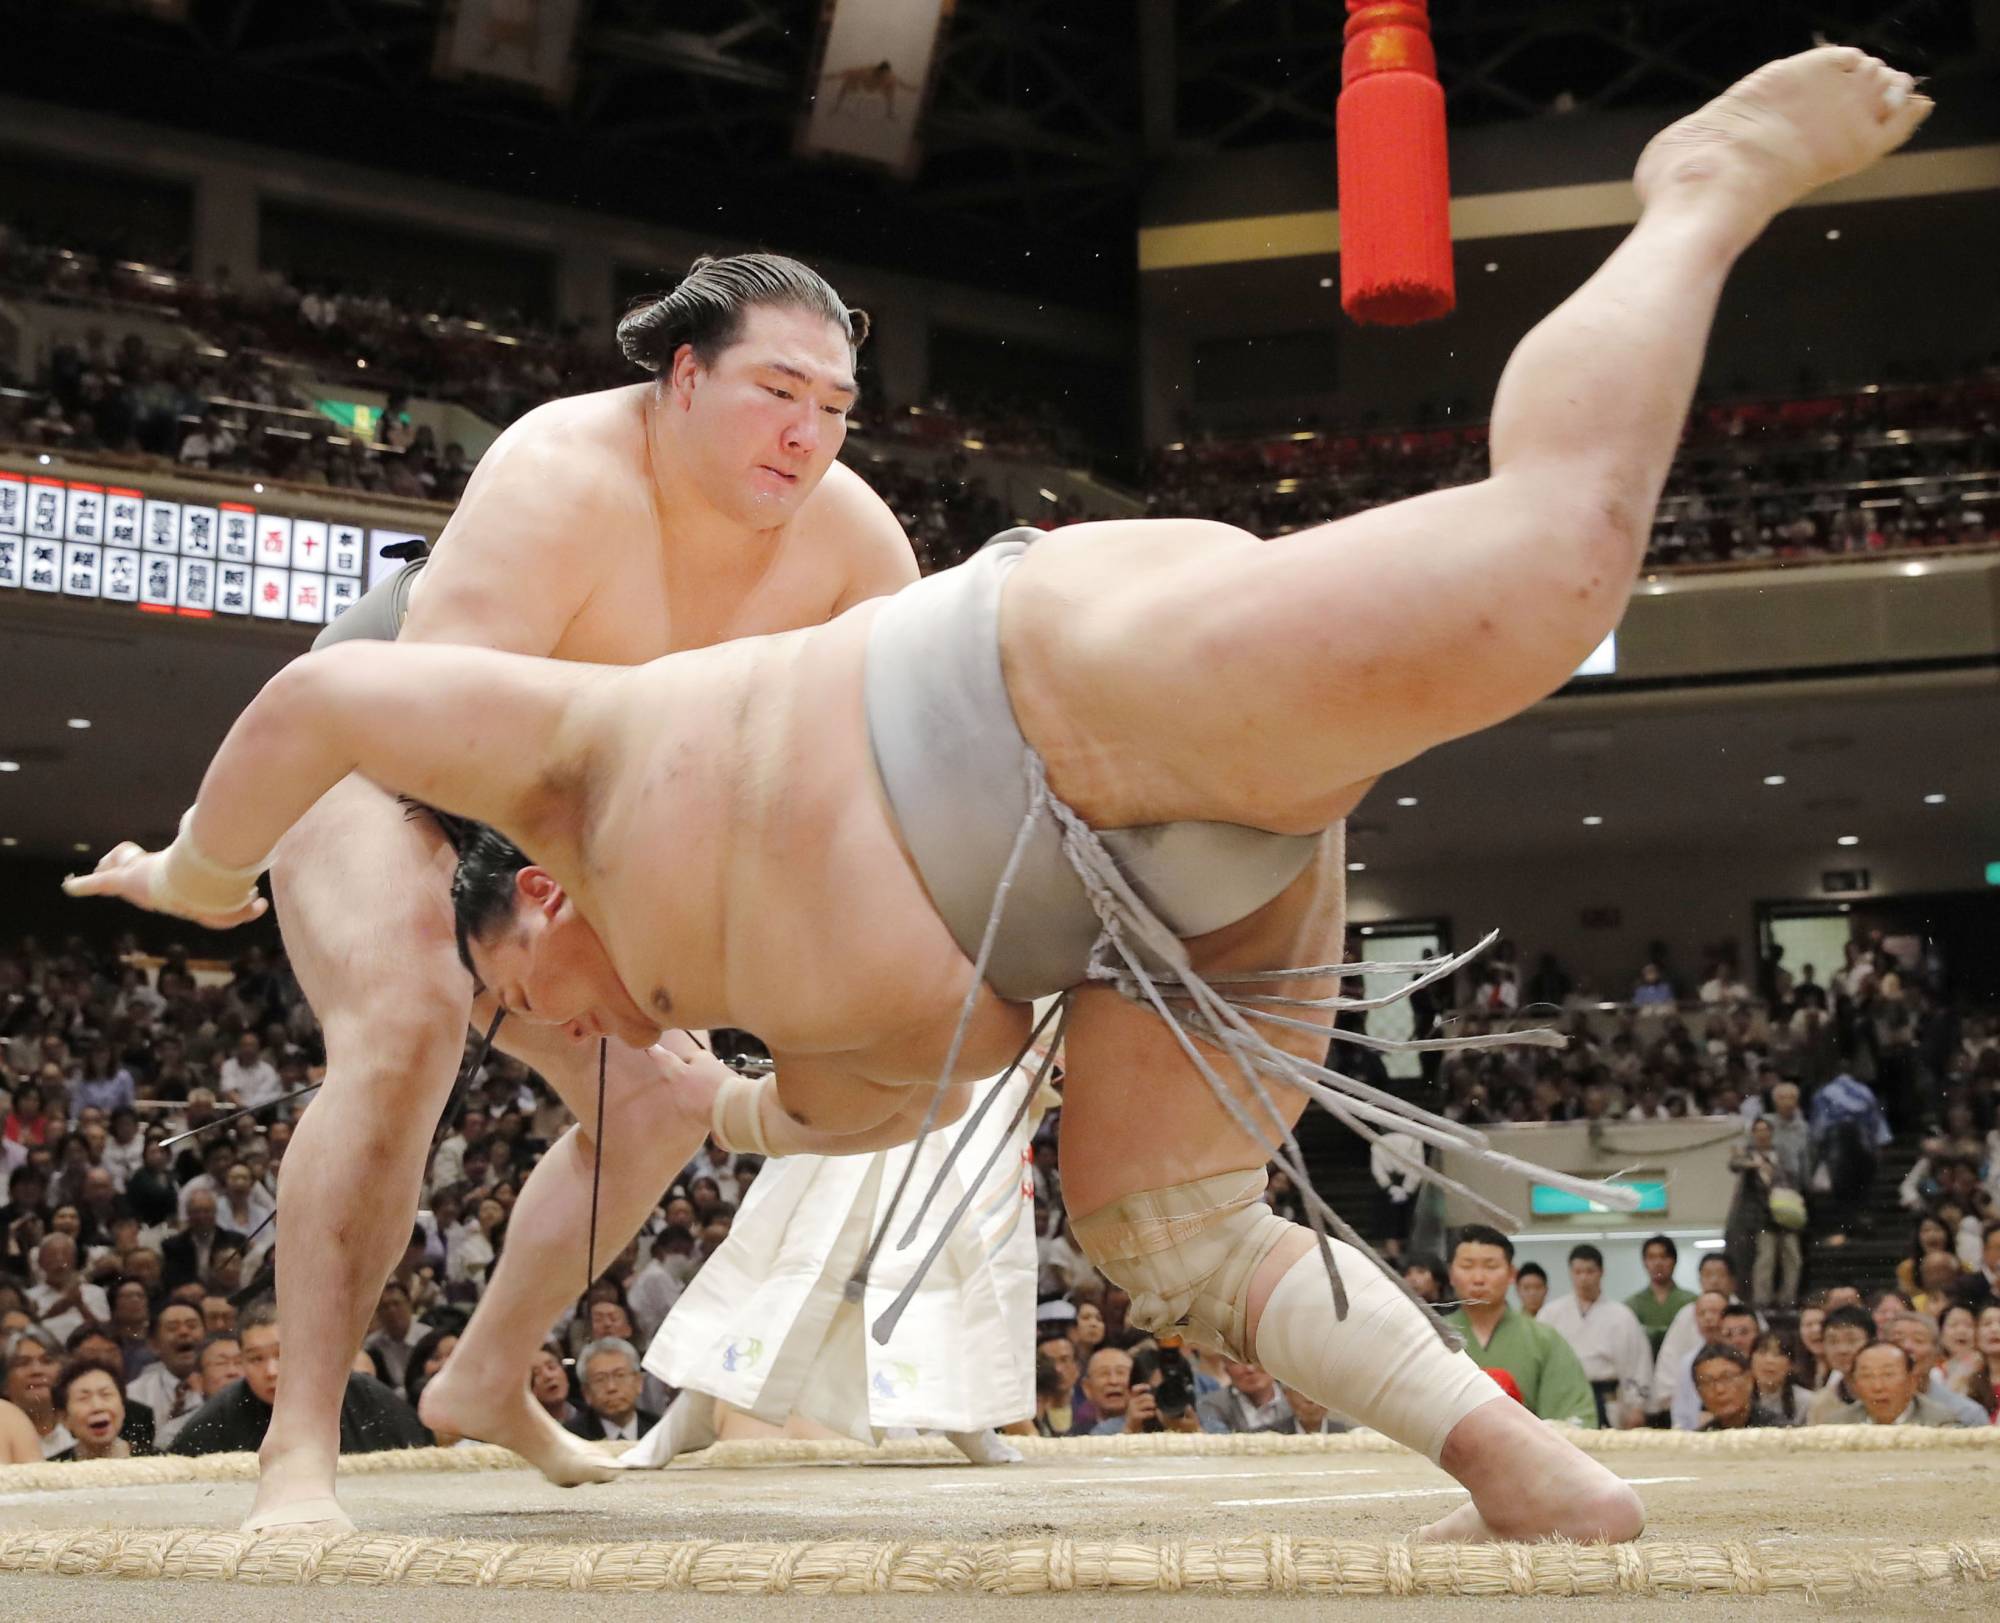 In an infamous incident during the 2018 May Basho, Hokutofuji was defeated by Ryuden after appearing to sustain a concussion during a false start just moments earlier. | KYODO